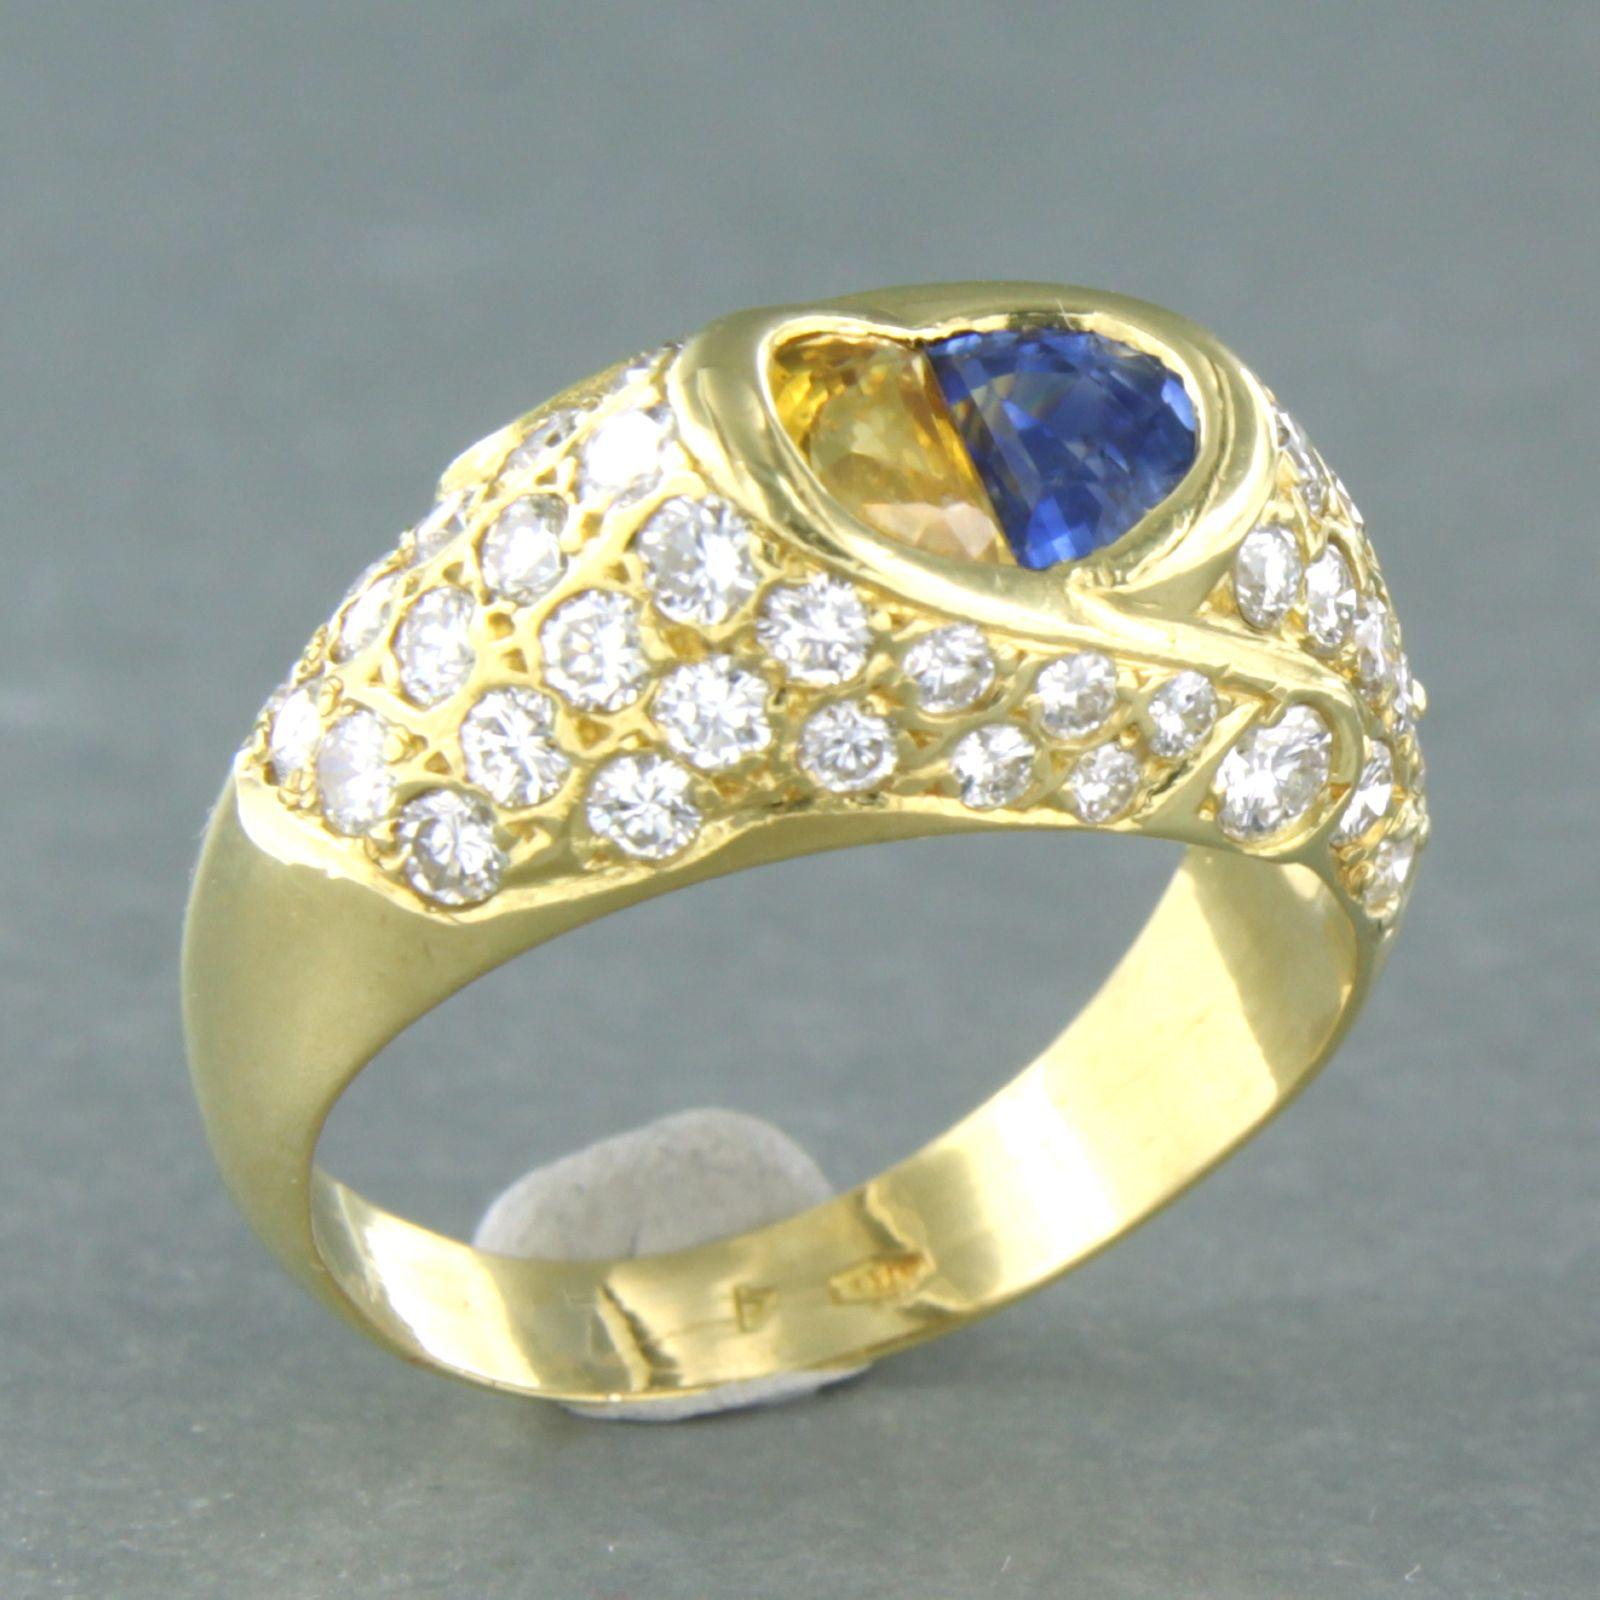 Ring with yellow and blue sapphire, and diamond, 18k gold For Sale 2